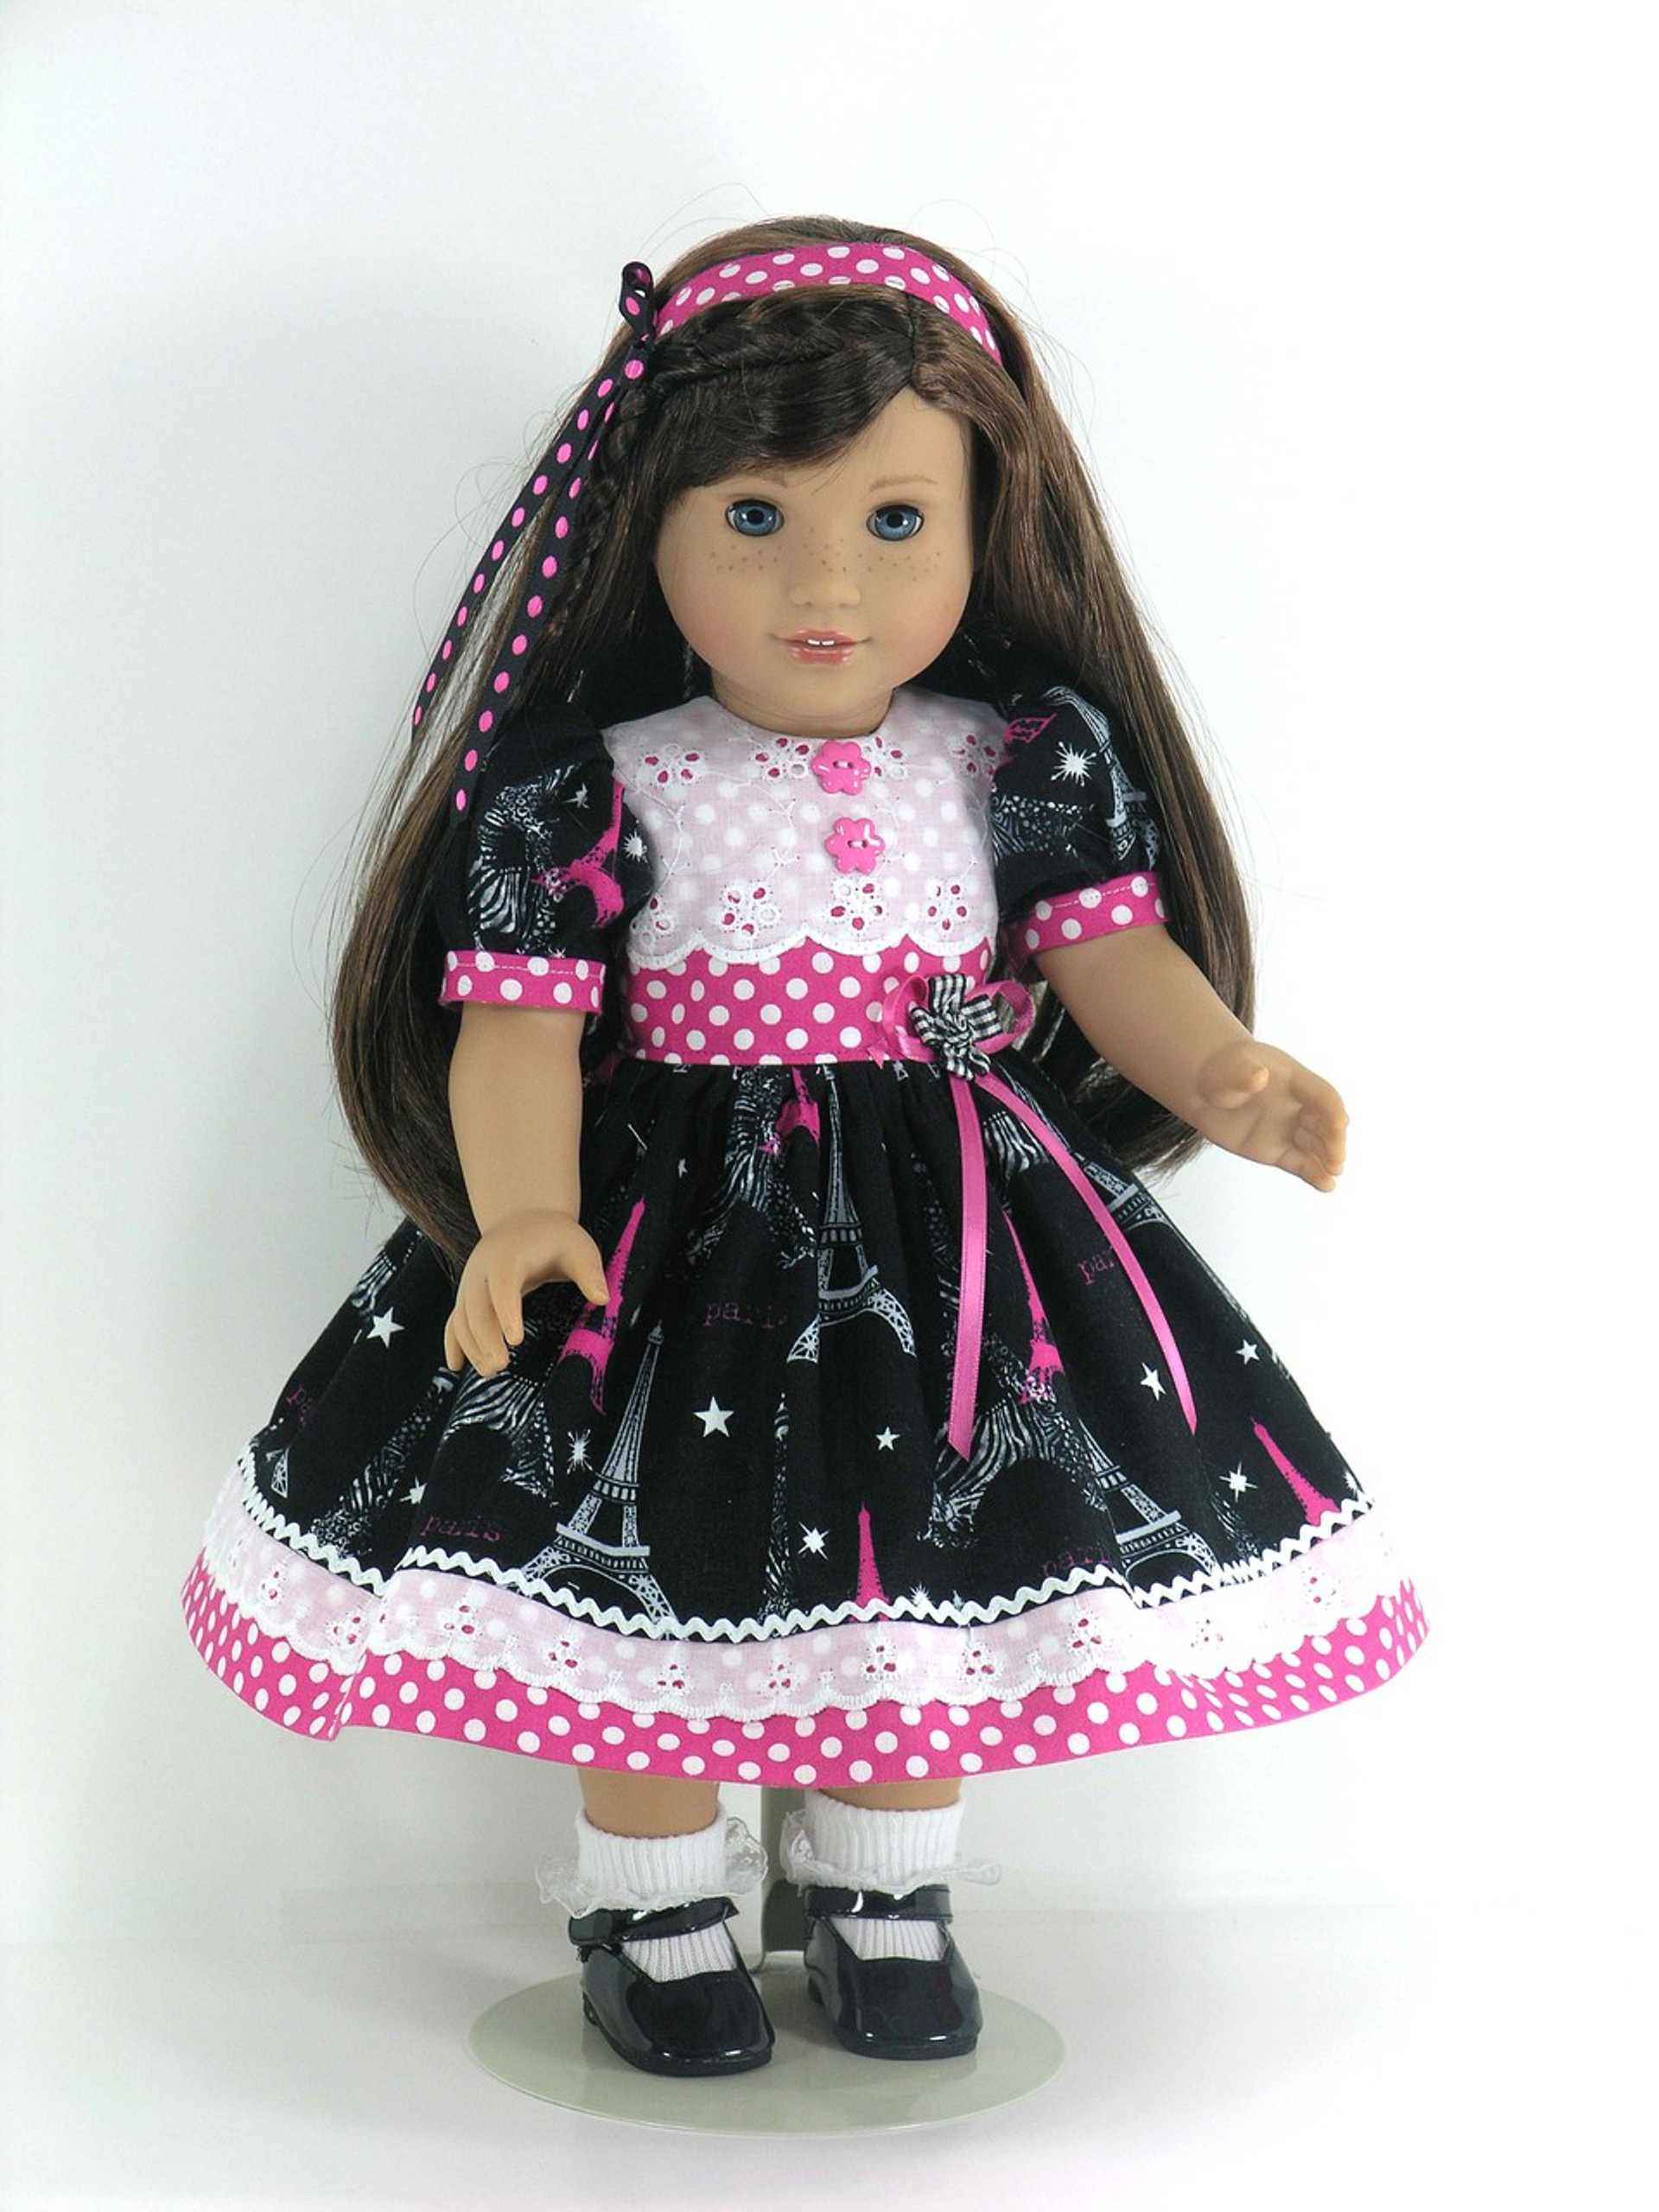 Kit, Mary Ellen, Grace, Ruthie, Molly - Page 2 - Exclusively Linda Doll ...